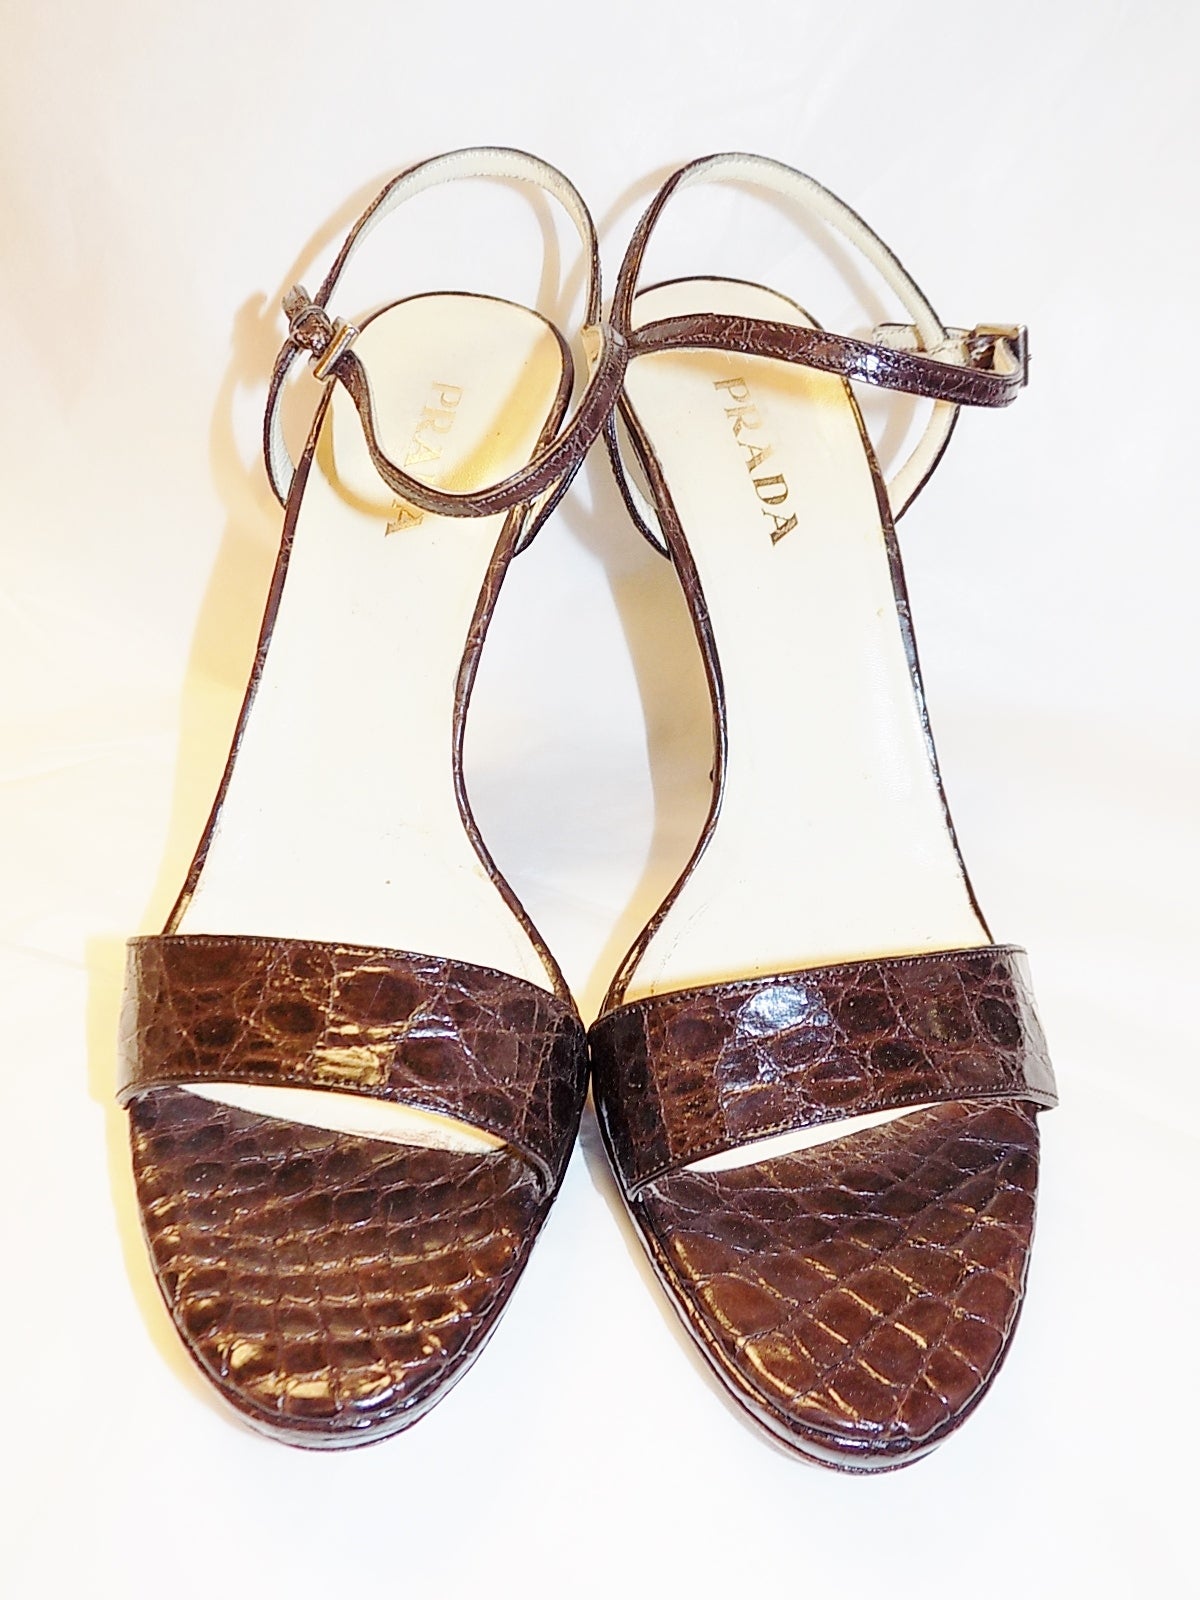 Stunning brown Prada alligator sandals. perfect for jeans or casual summer dress with Hermes bag. Small 1/2 inch platform and 4.5